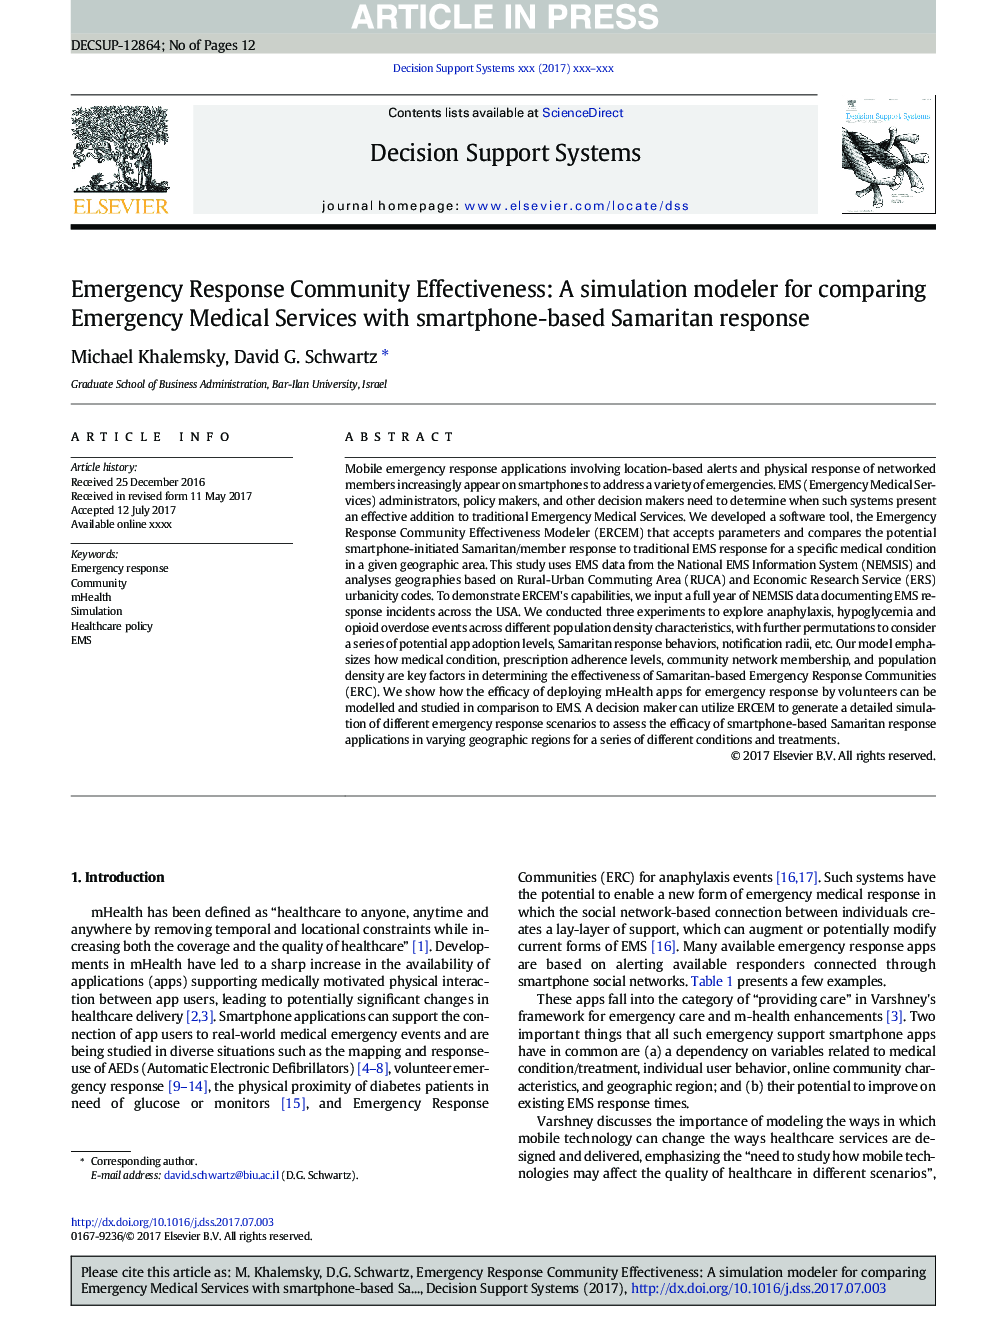 Emergency Response Community Effectiveness: A simulation modeler for comparing Emergency Medical Services with smartphone-based Samaritan response